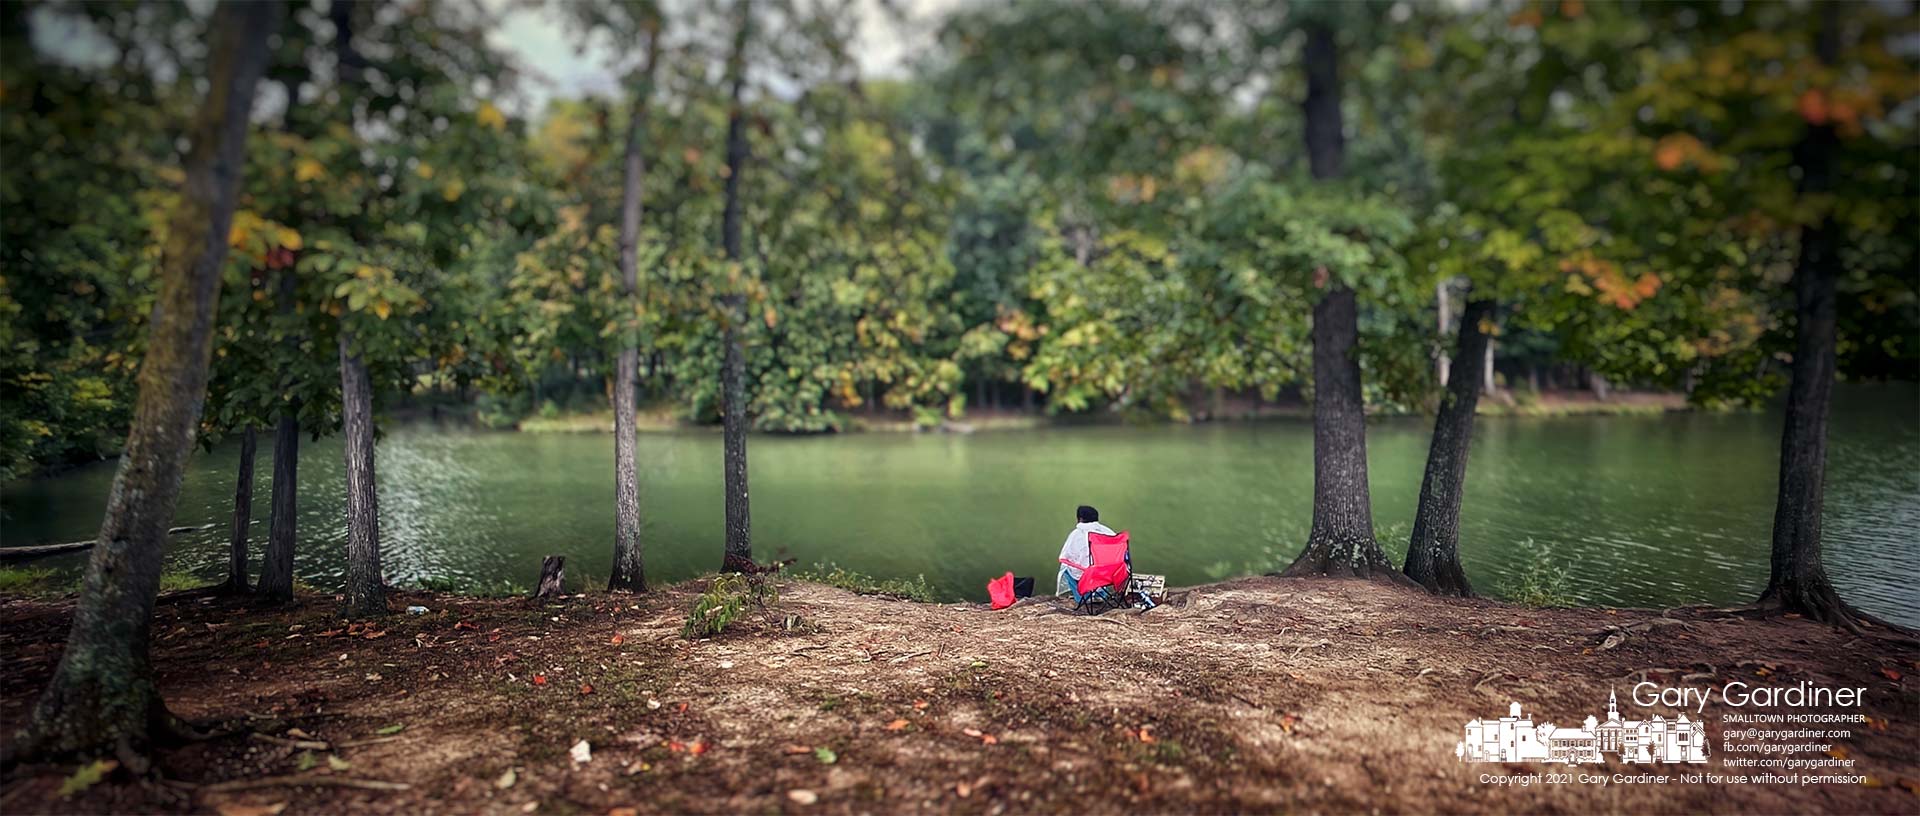 A lone woman fishes in a small inlet near one of the docks on Alum Creek State Park on Sunday afternoon. My Final Photo for Oct. 3, 2021.